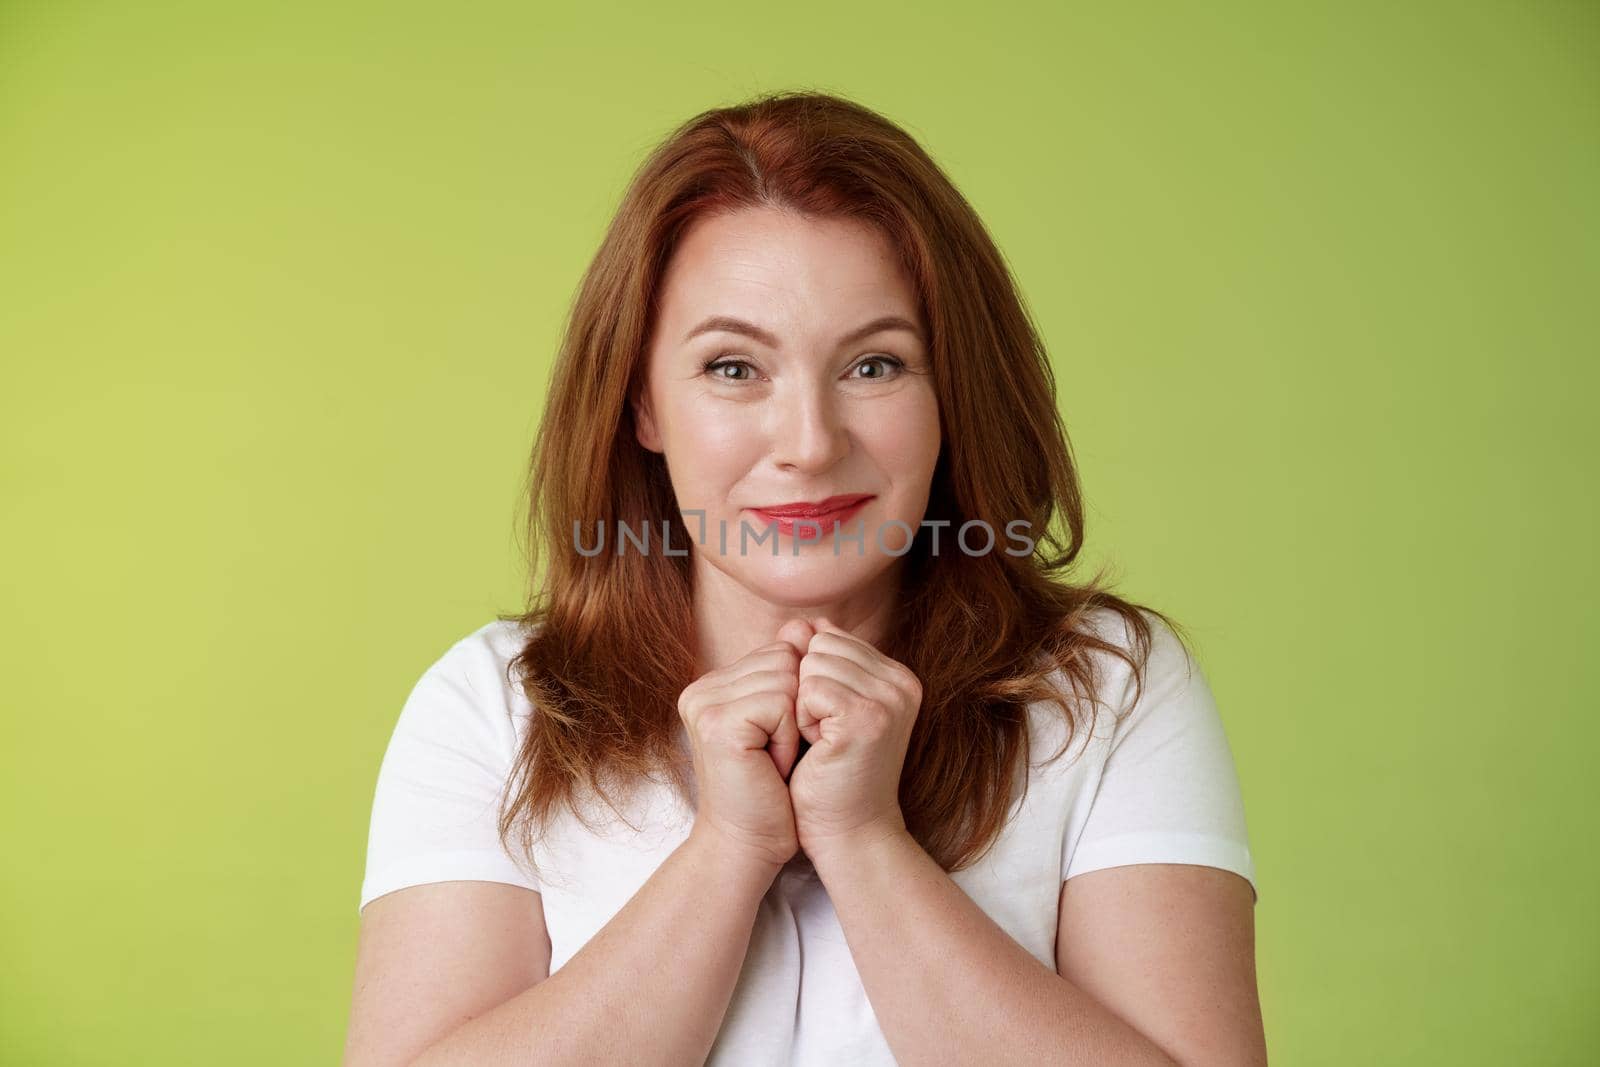 Cheerful lovely pleasant redhead middle-aged female press hands together delight kind happy gaze smiling joyfully touched grateful receive heartwarming gift look admiration happiness.